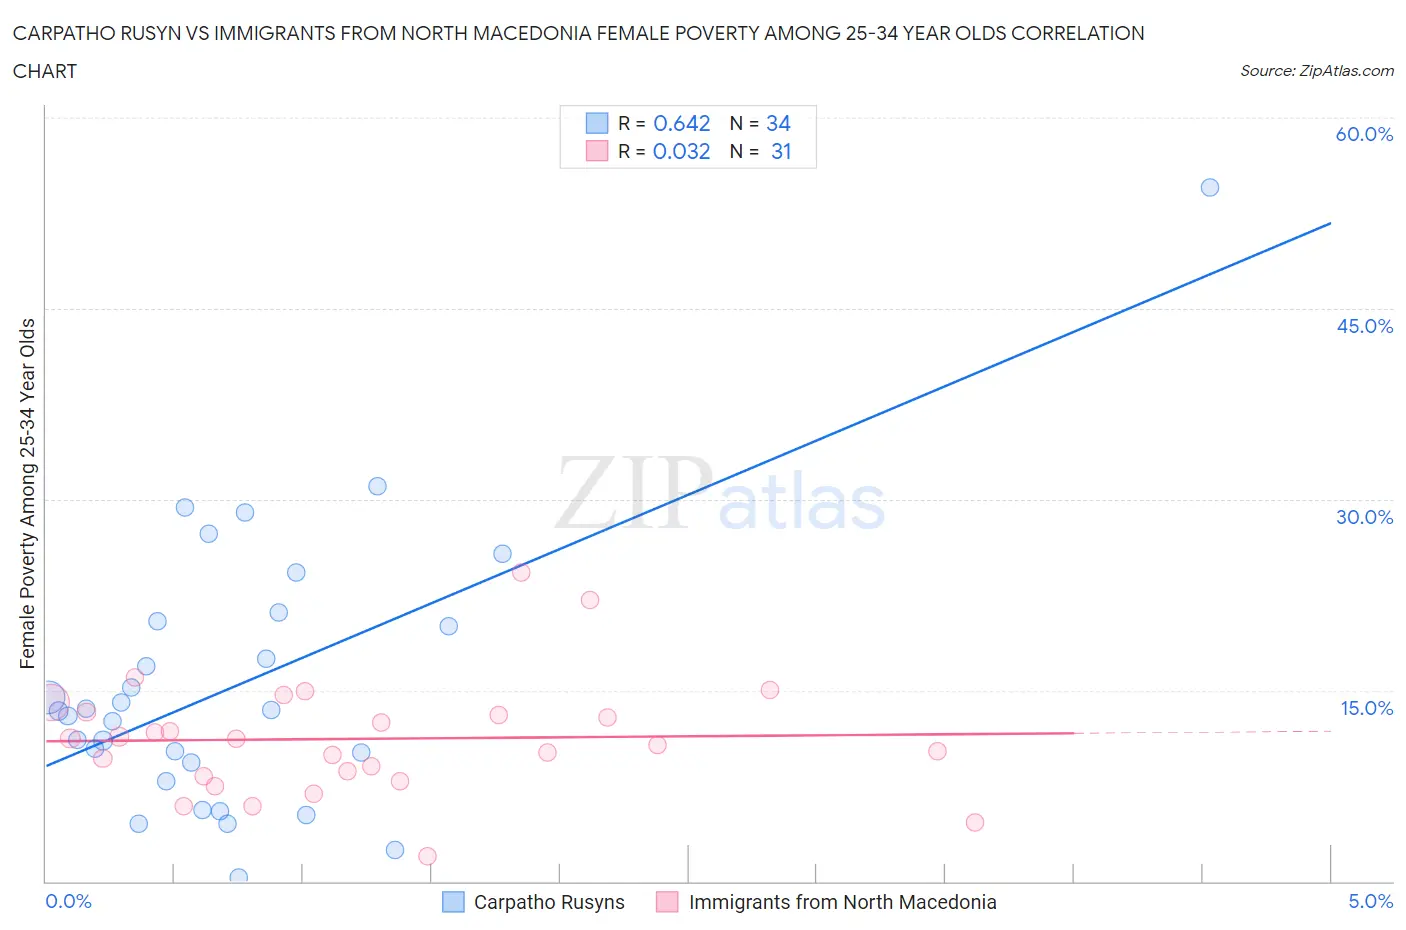 Carpatho Rusyn vs Immigrants from North Macedonia Female Poverty Among 25-34 Year Olds